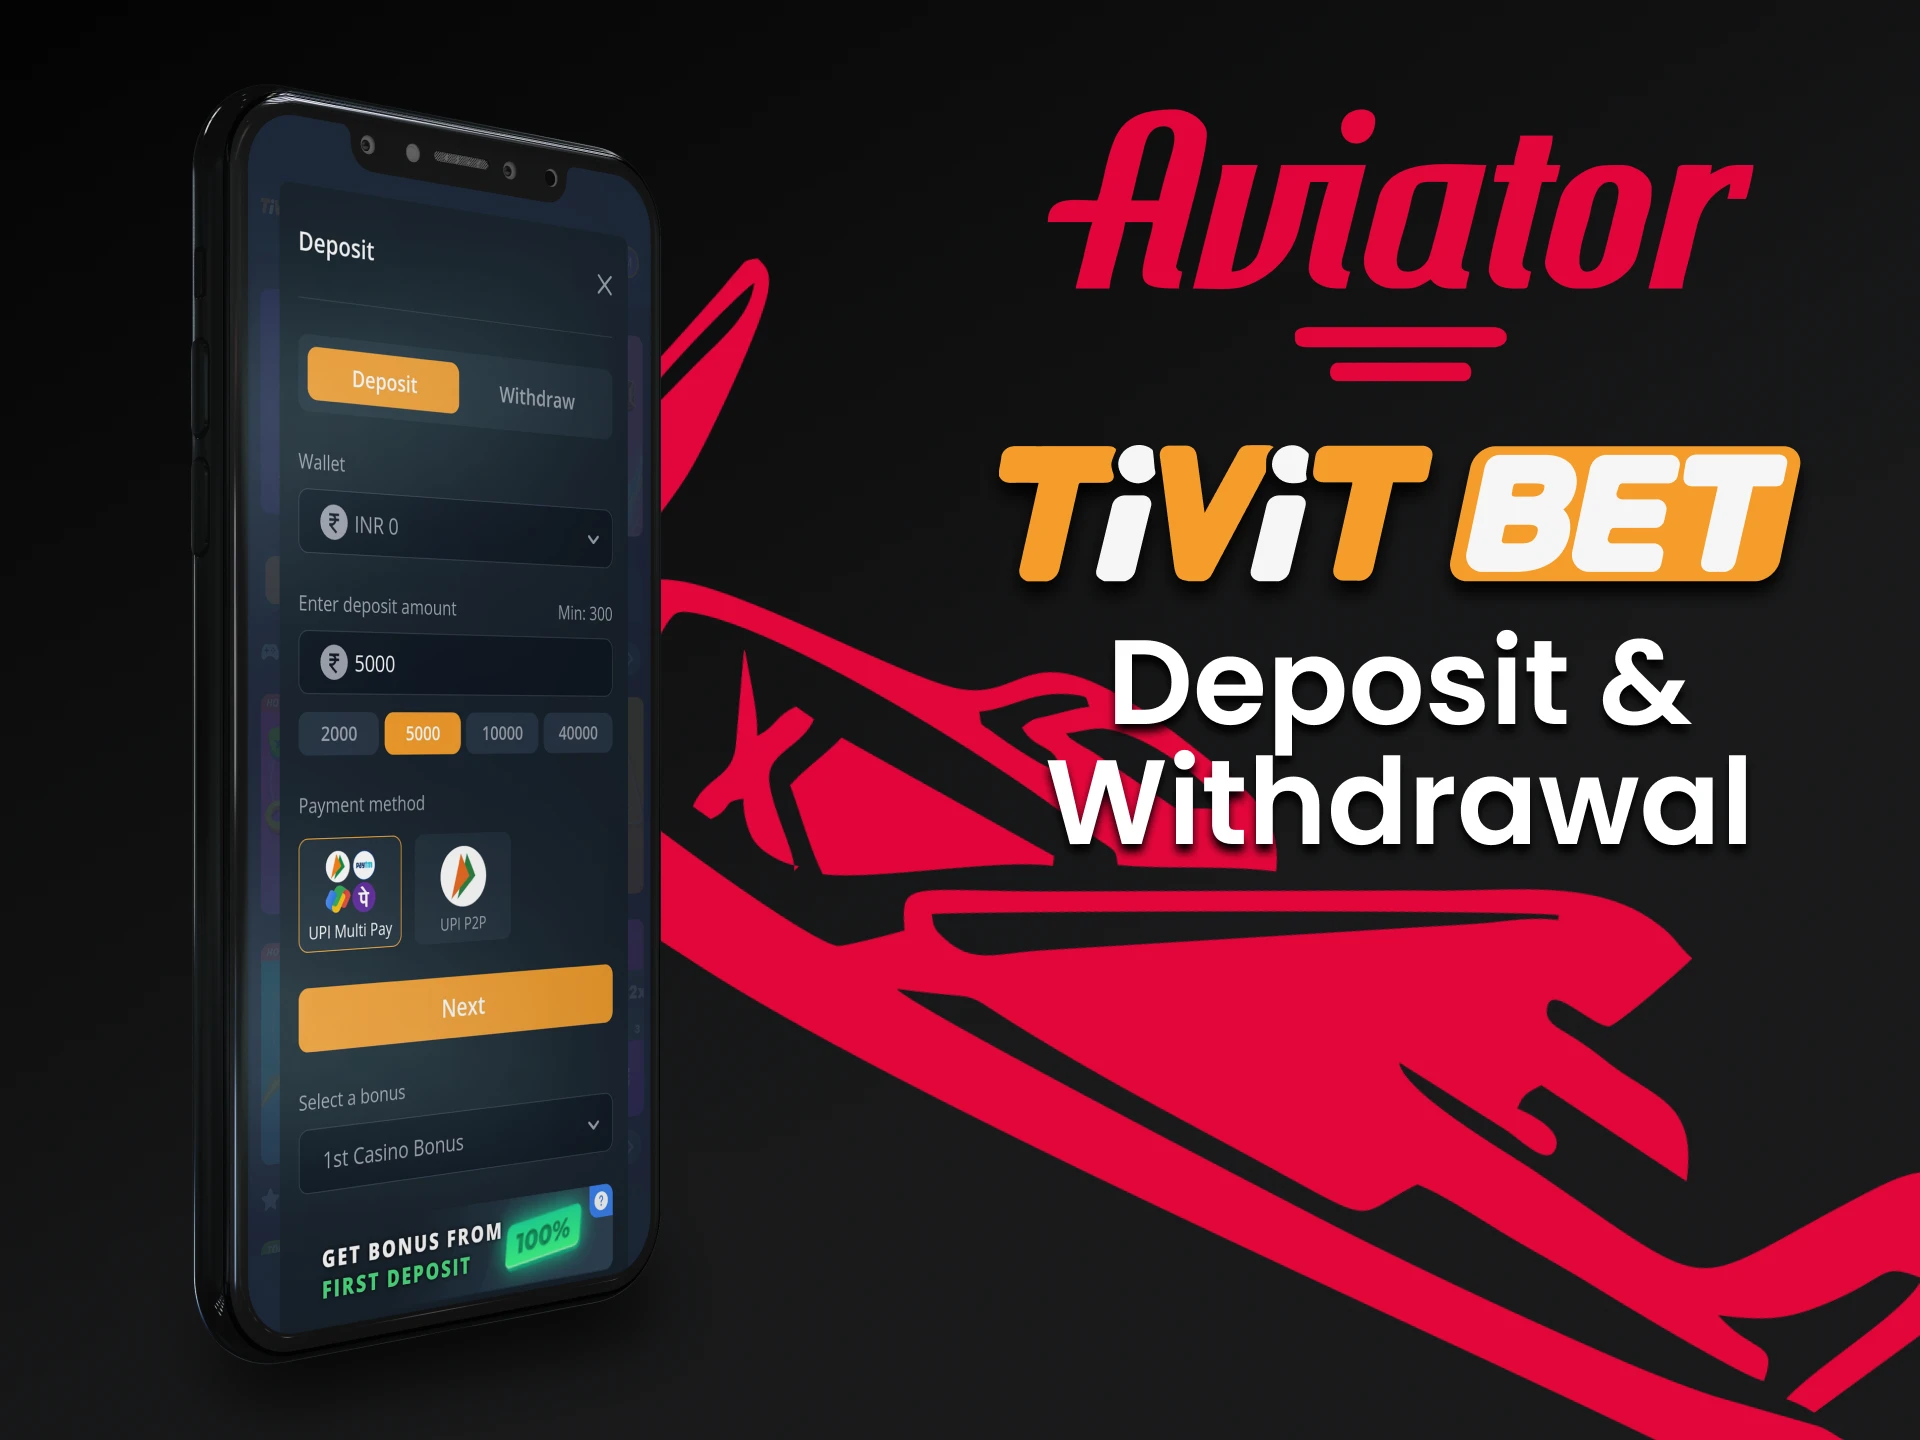 We will tell you about the transaction methods for the Aviator game in the Tivitbet app.